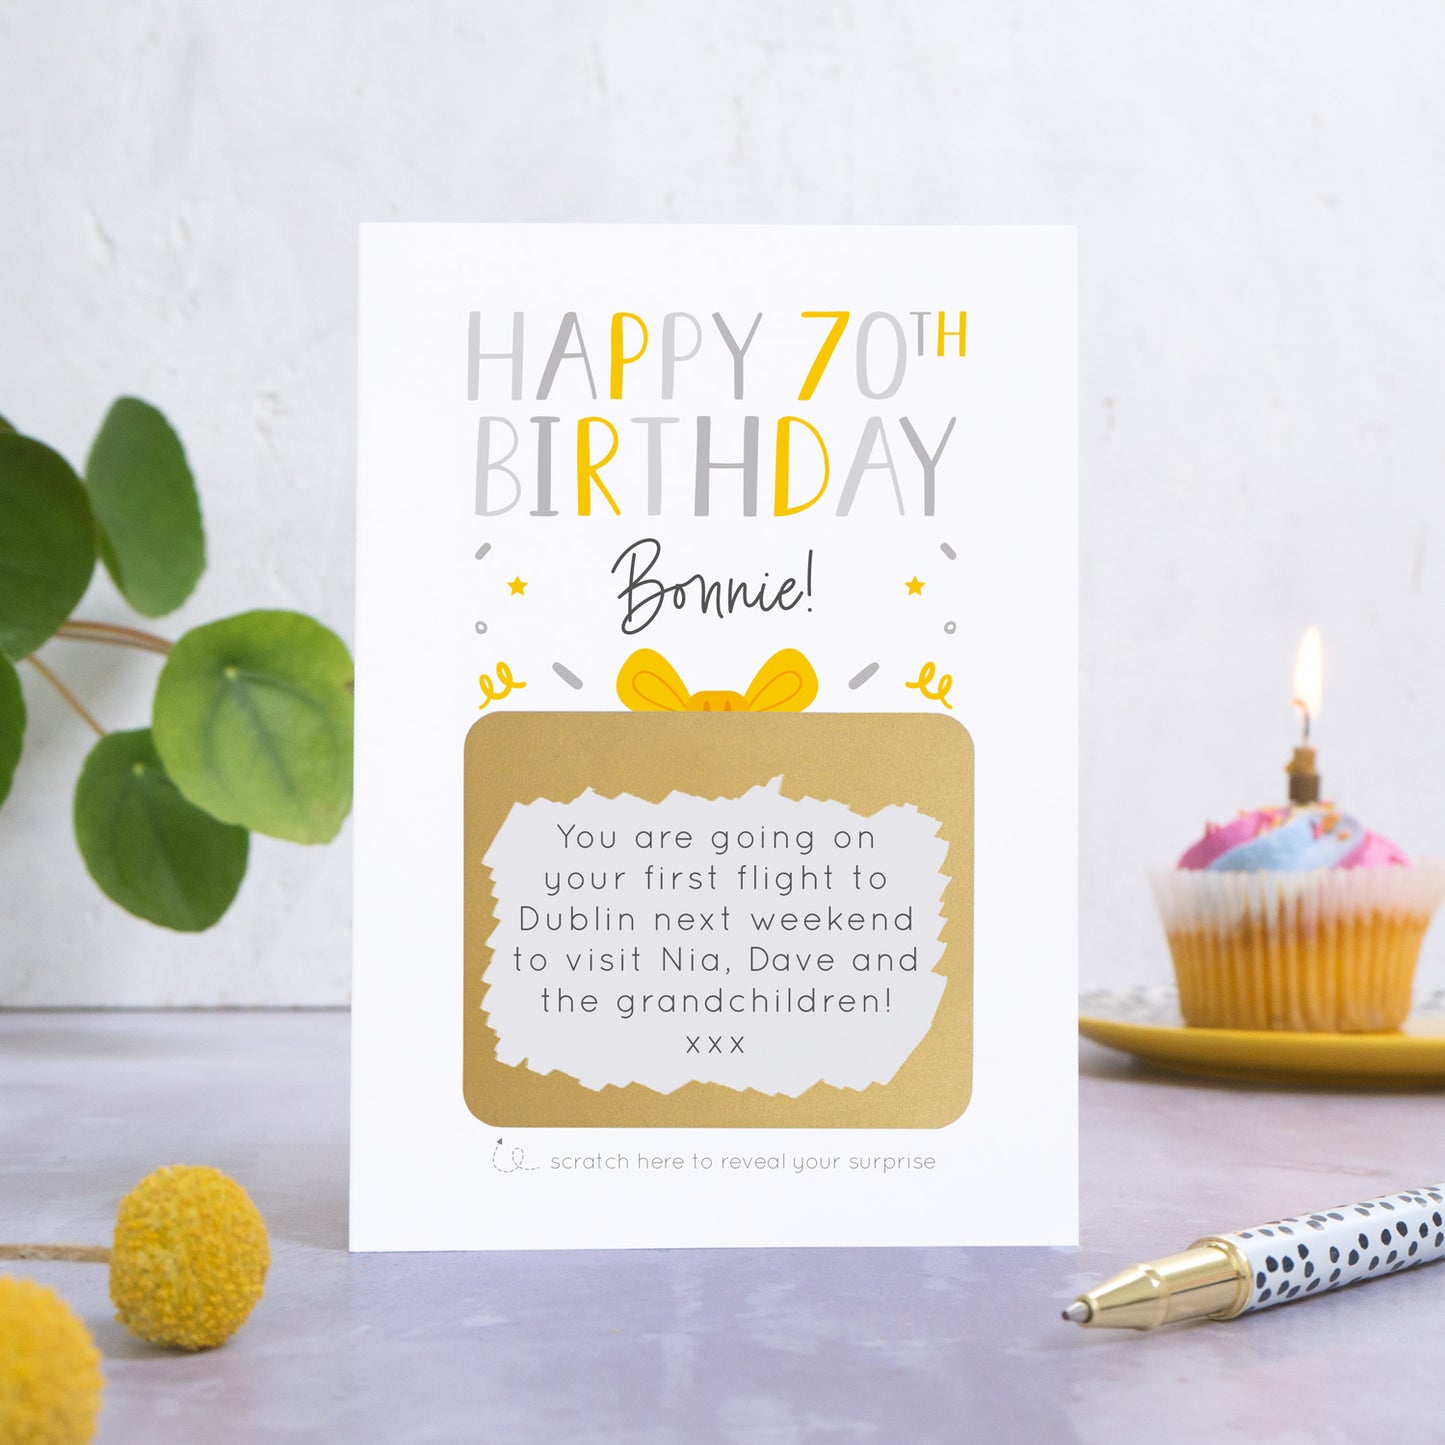 A personalised happy 70th birthday scratch card in grey that has been photographed on a white and grey background. There is foliage and yellow flowers on the left and a cupcake and a pen to the right. The card features the recipients name and a scratch panel that has been scratched off revealing a personalised message.